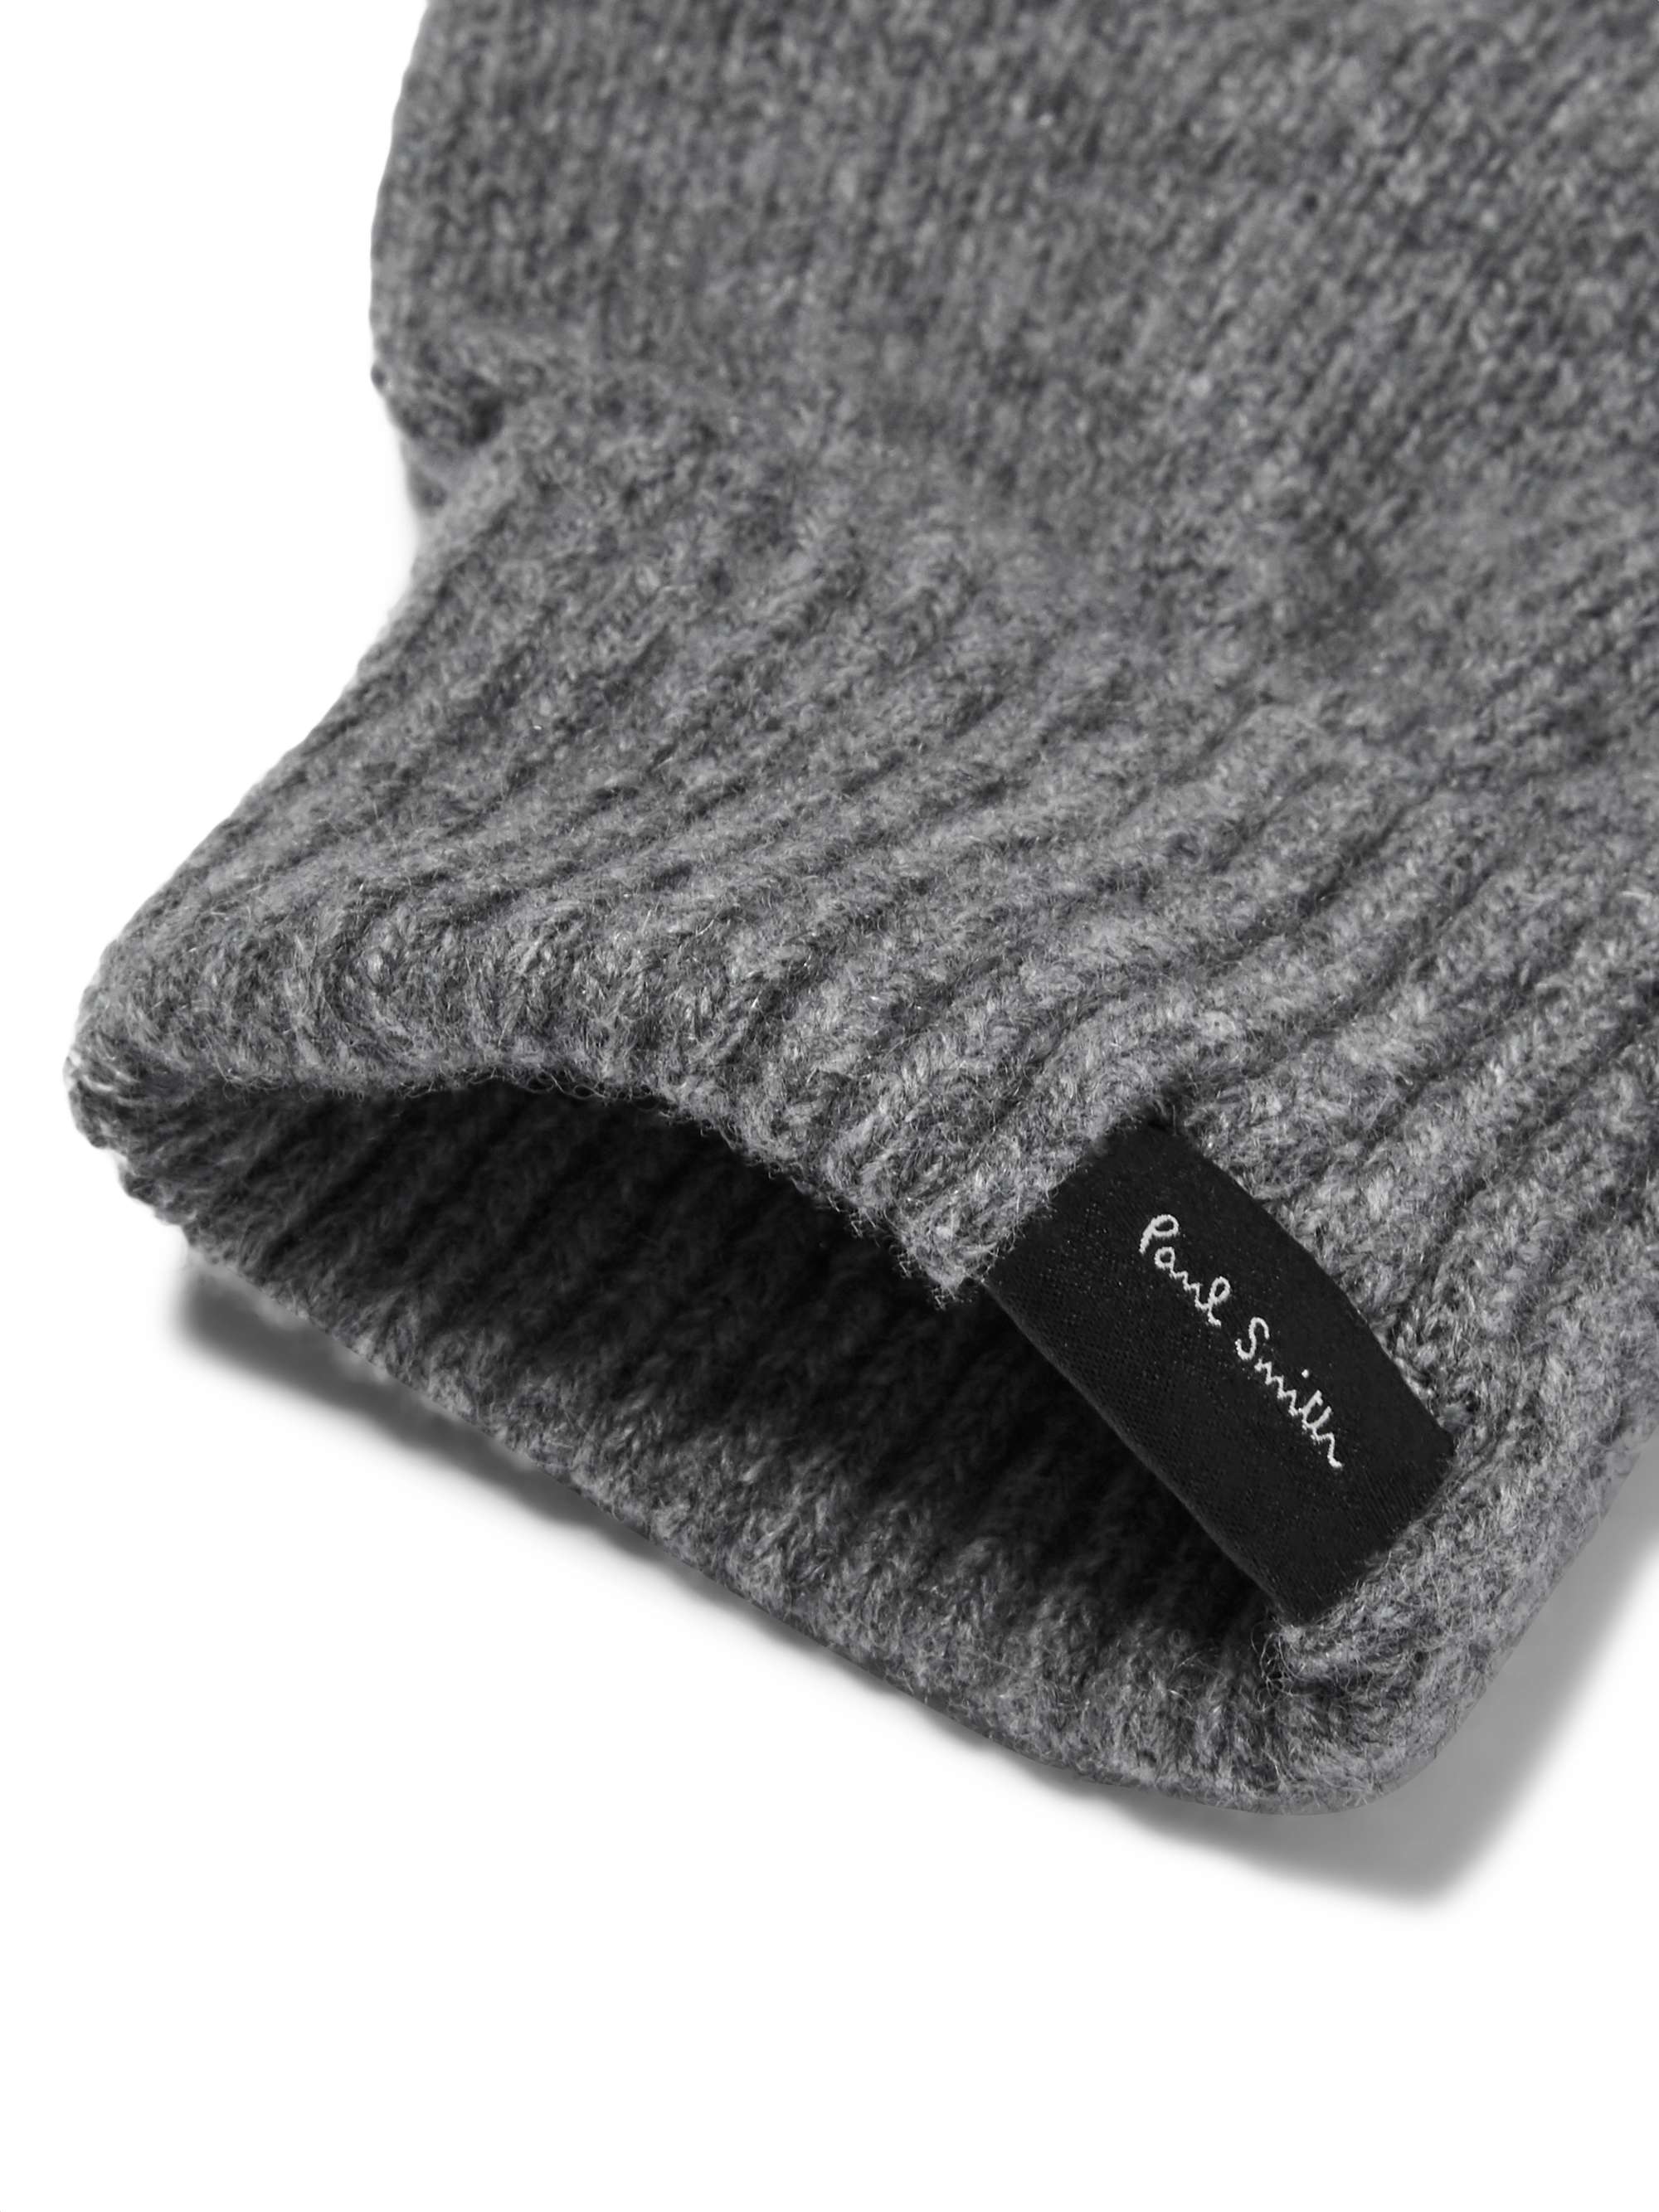 PAUL SMITH Cashmere and Wool-Blend Gloves